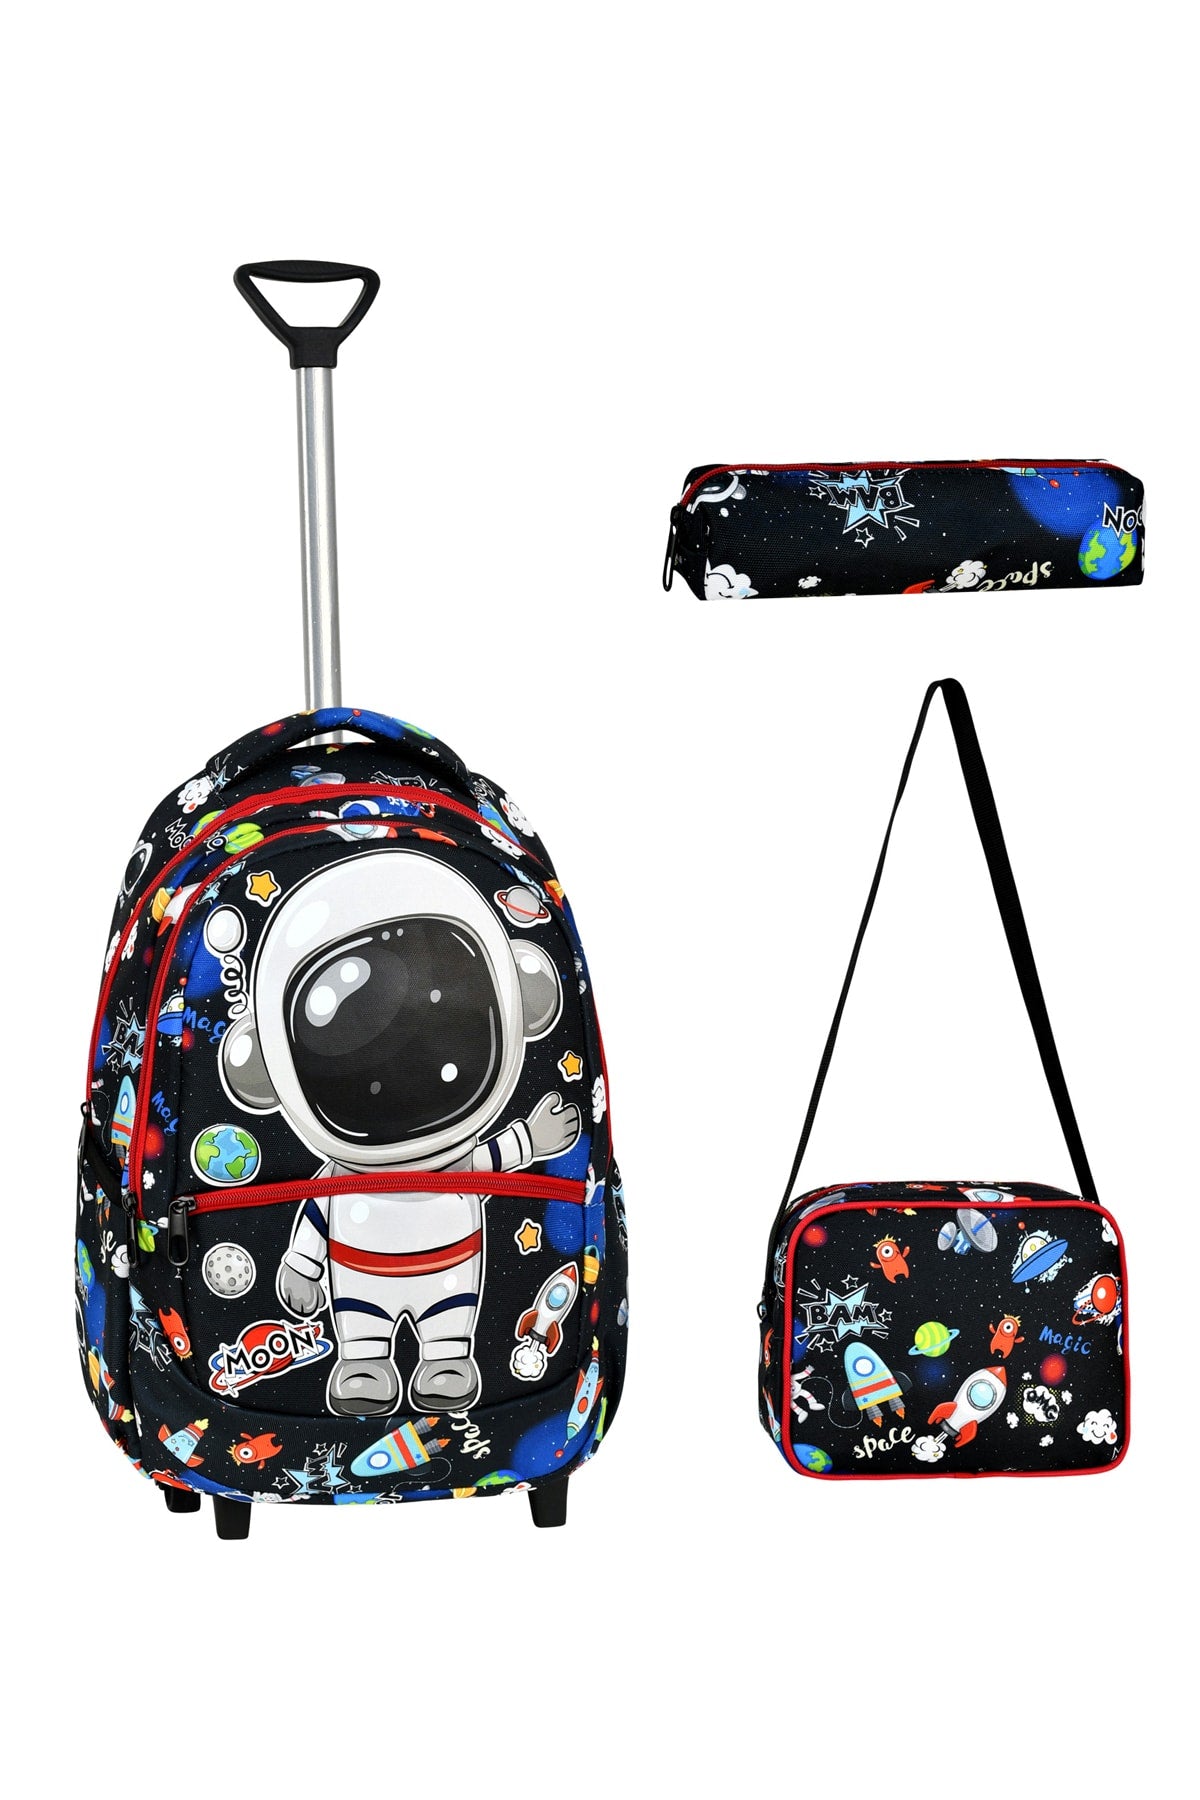 3-pack School Set with Squeegee, Black Space Pattern Primary School Bag + Lunch Box + Pencil Holder